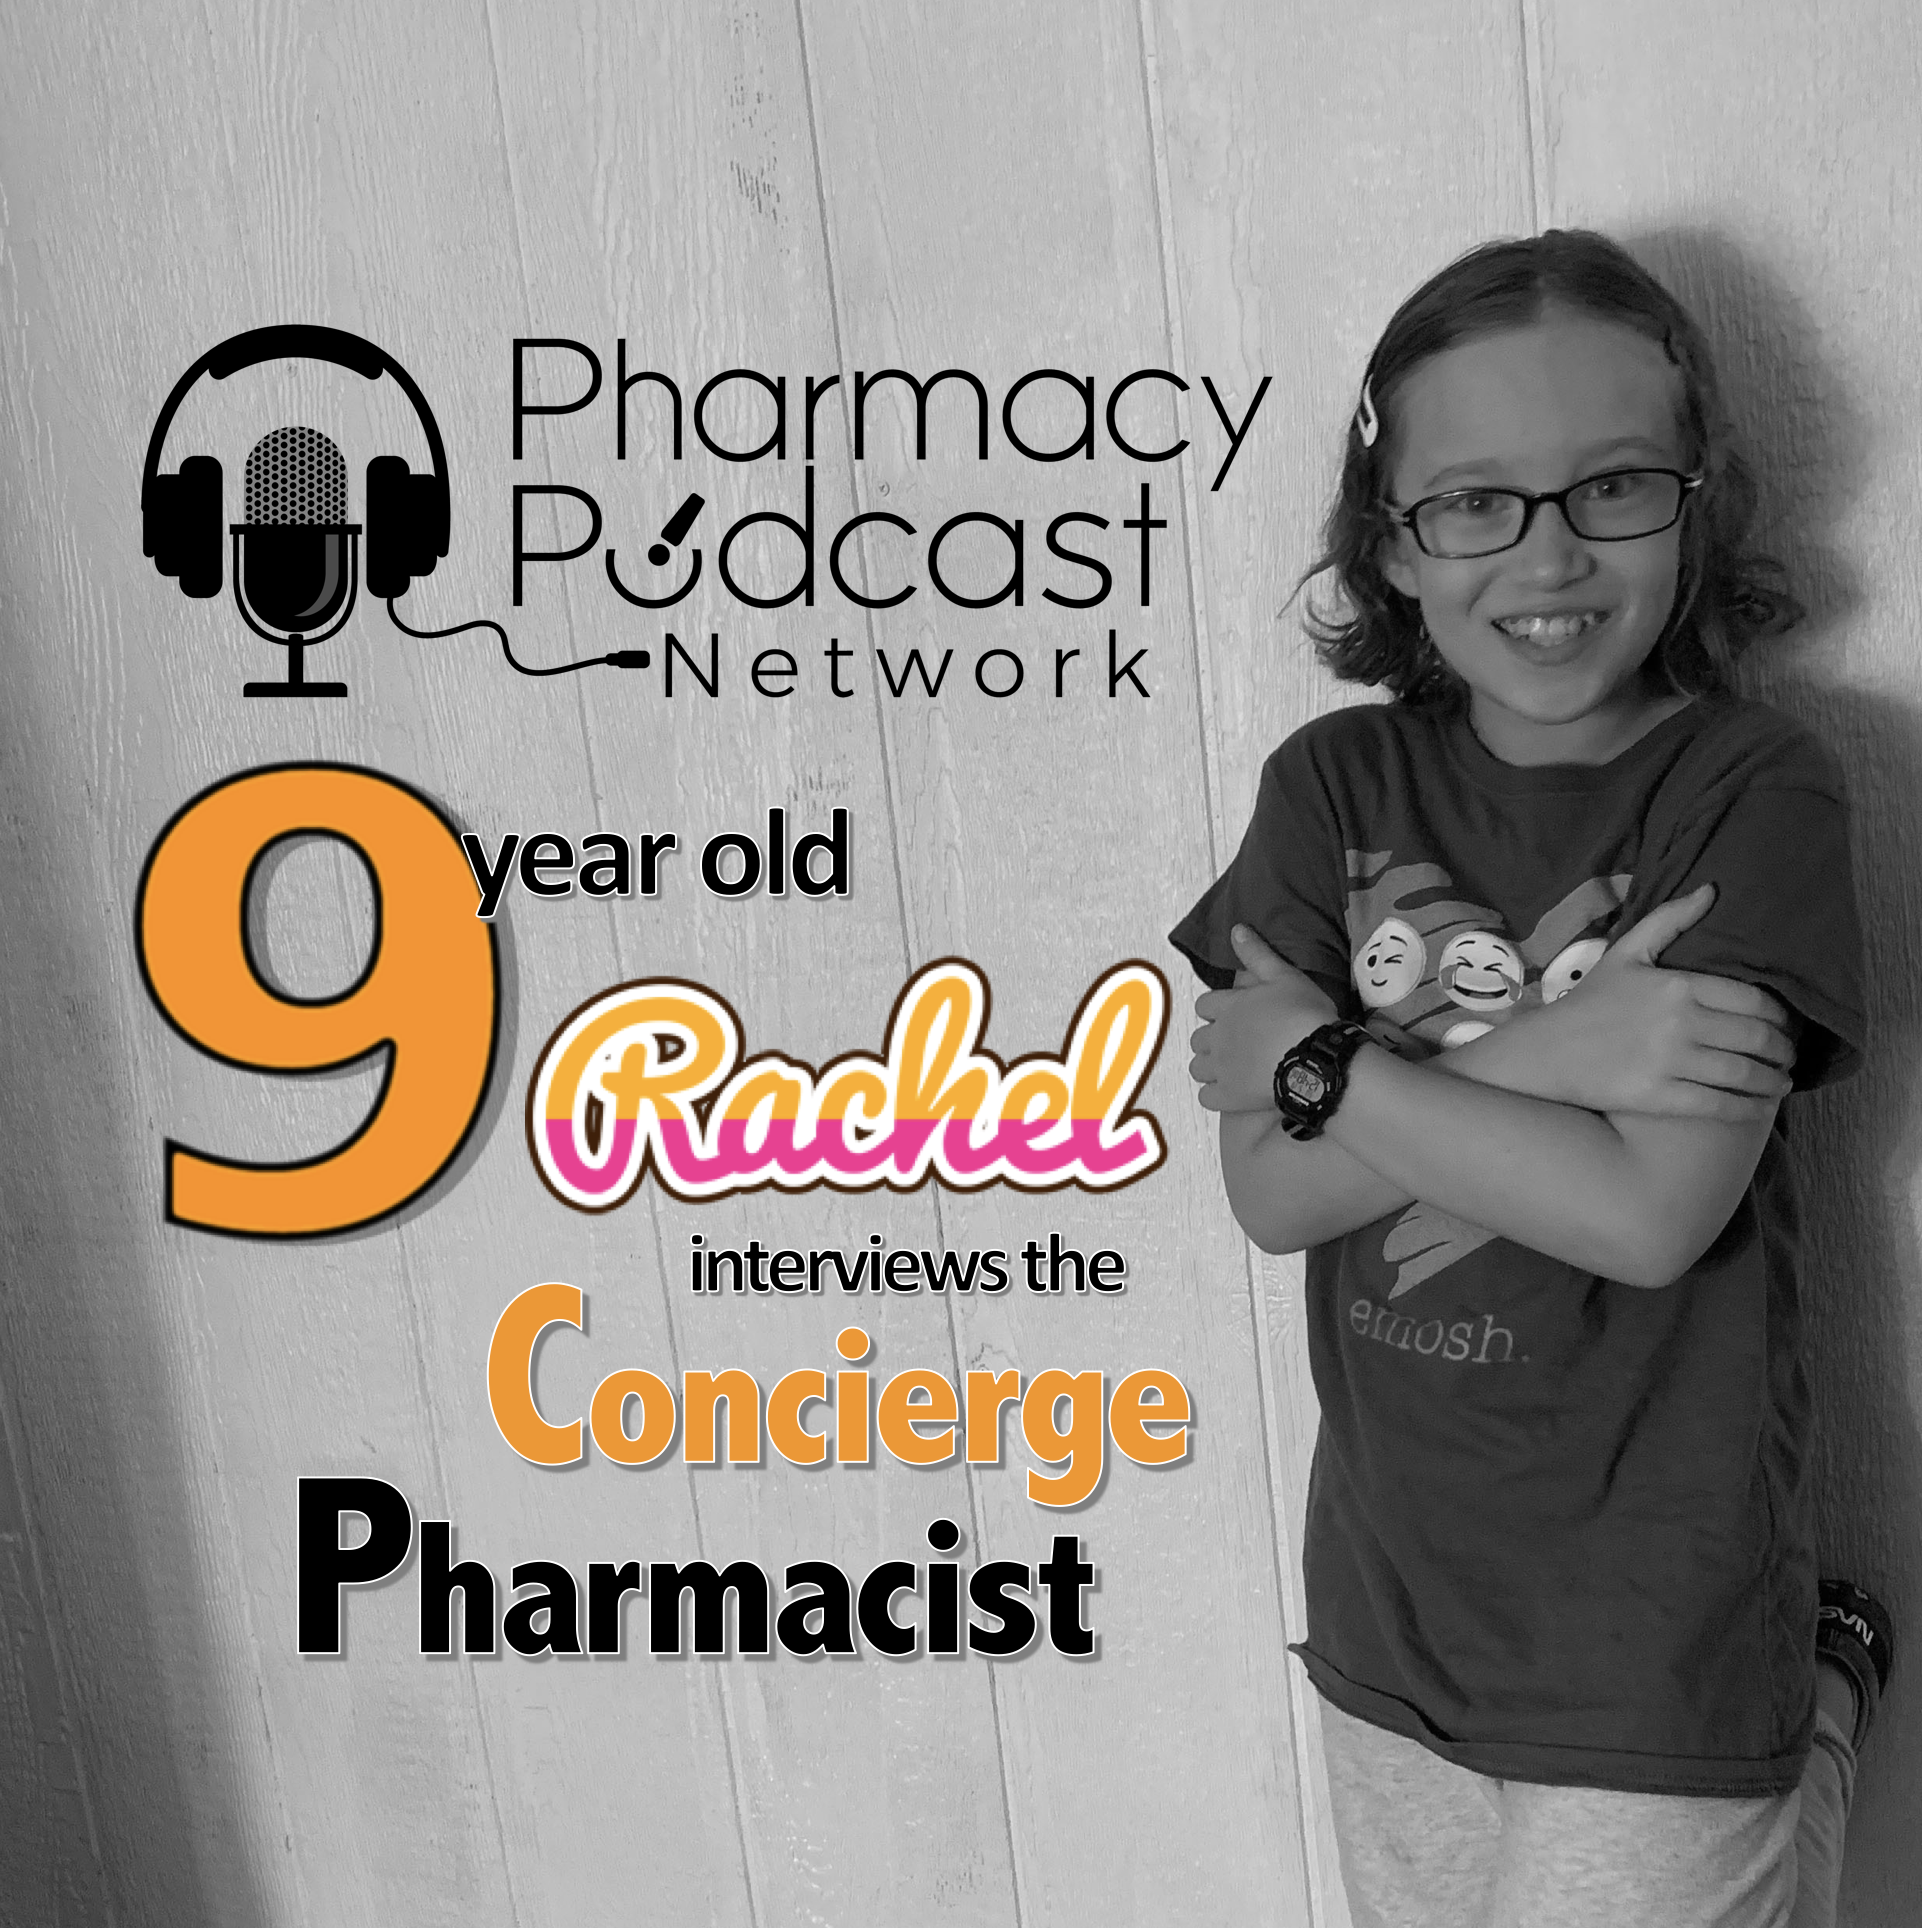 9 Year old Rachel interviews the Concierge Pharmacist - PPN Episode 813